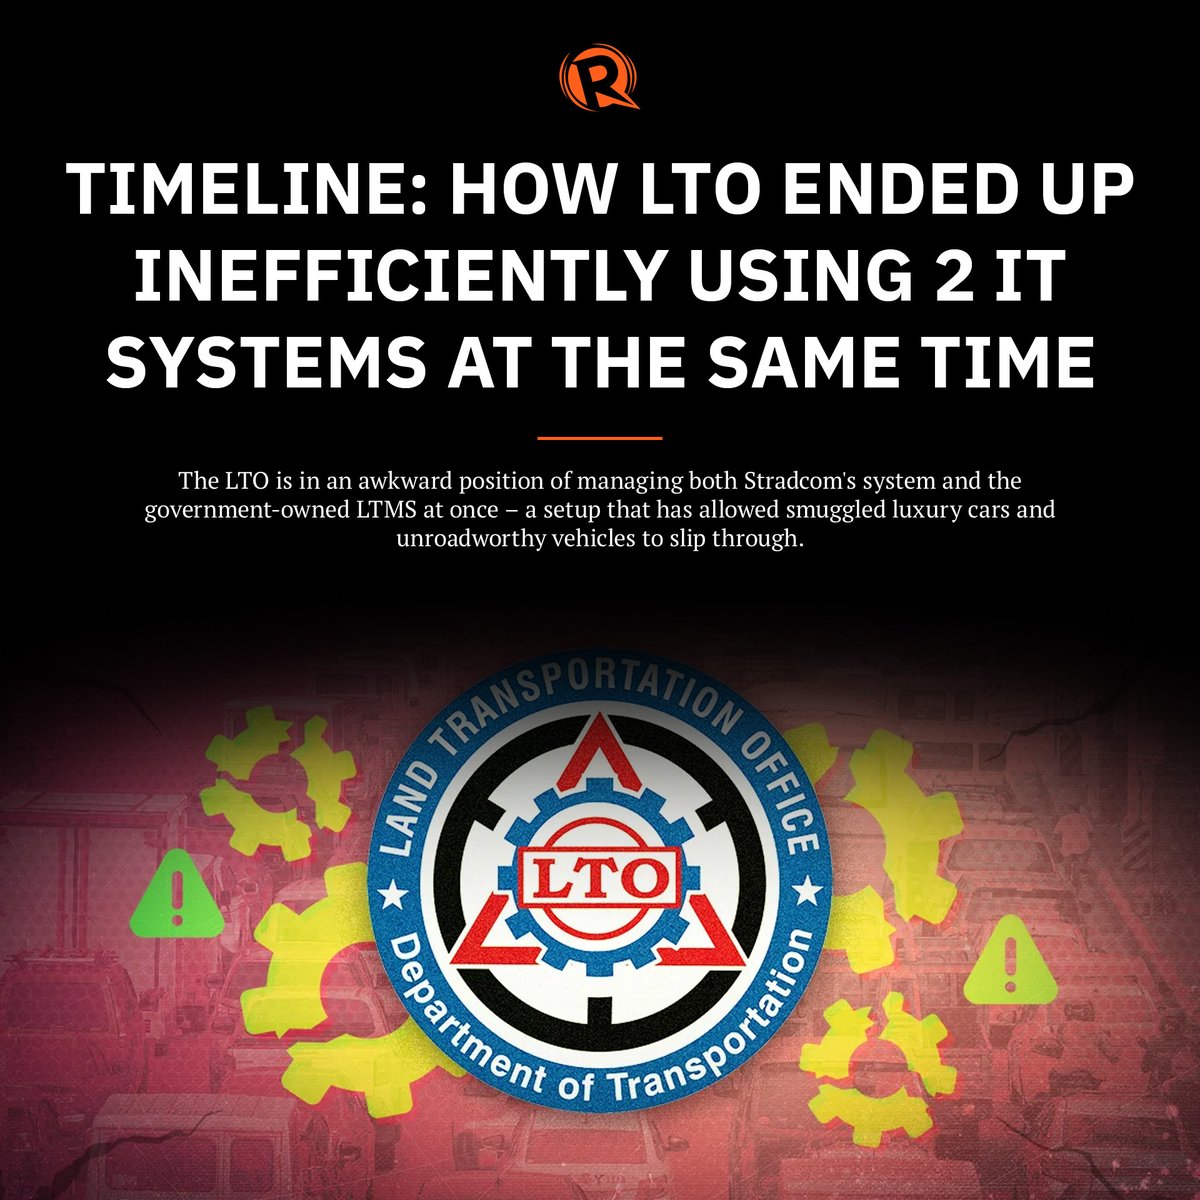 Rappler recently exposed how the parallel use of these two systems enables fraud and collectively costs motorists billions a year. But how did the LTO end up having two systems in the first place? Here’s the story. trib.al/XjrWzfU